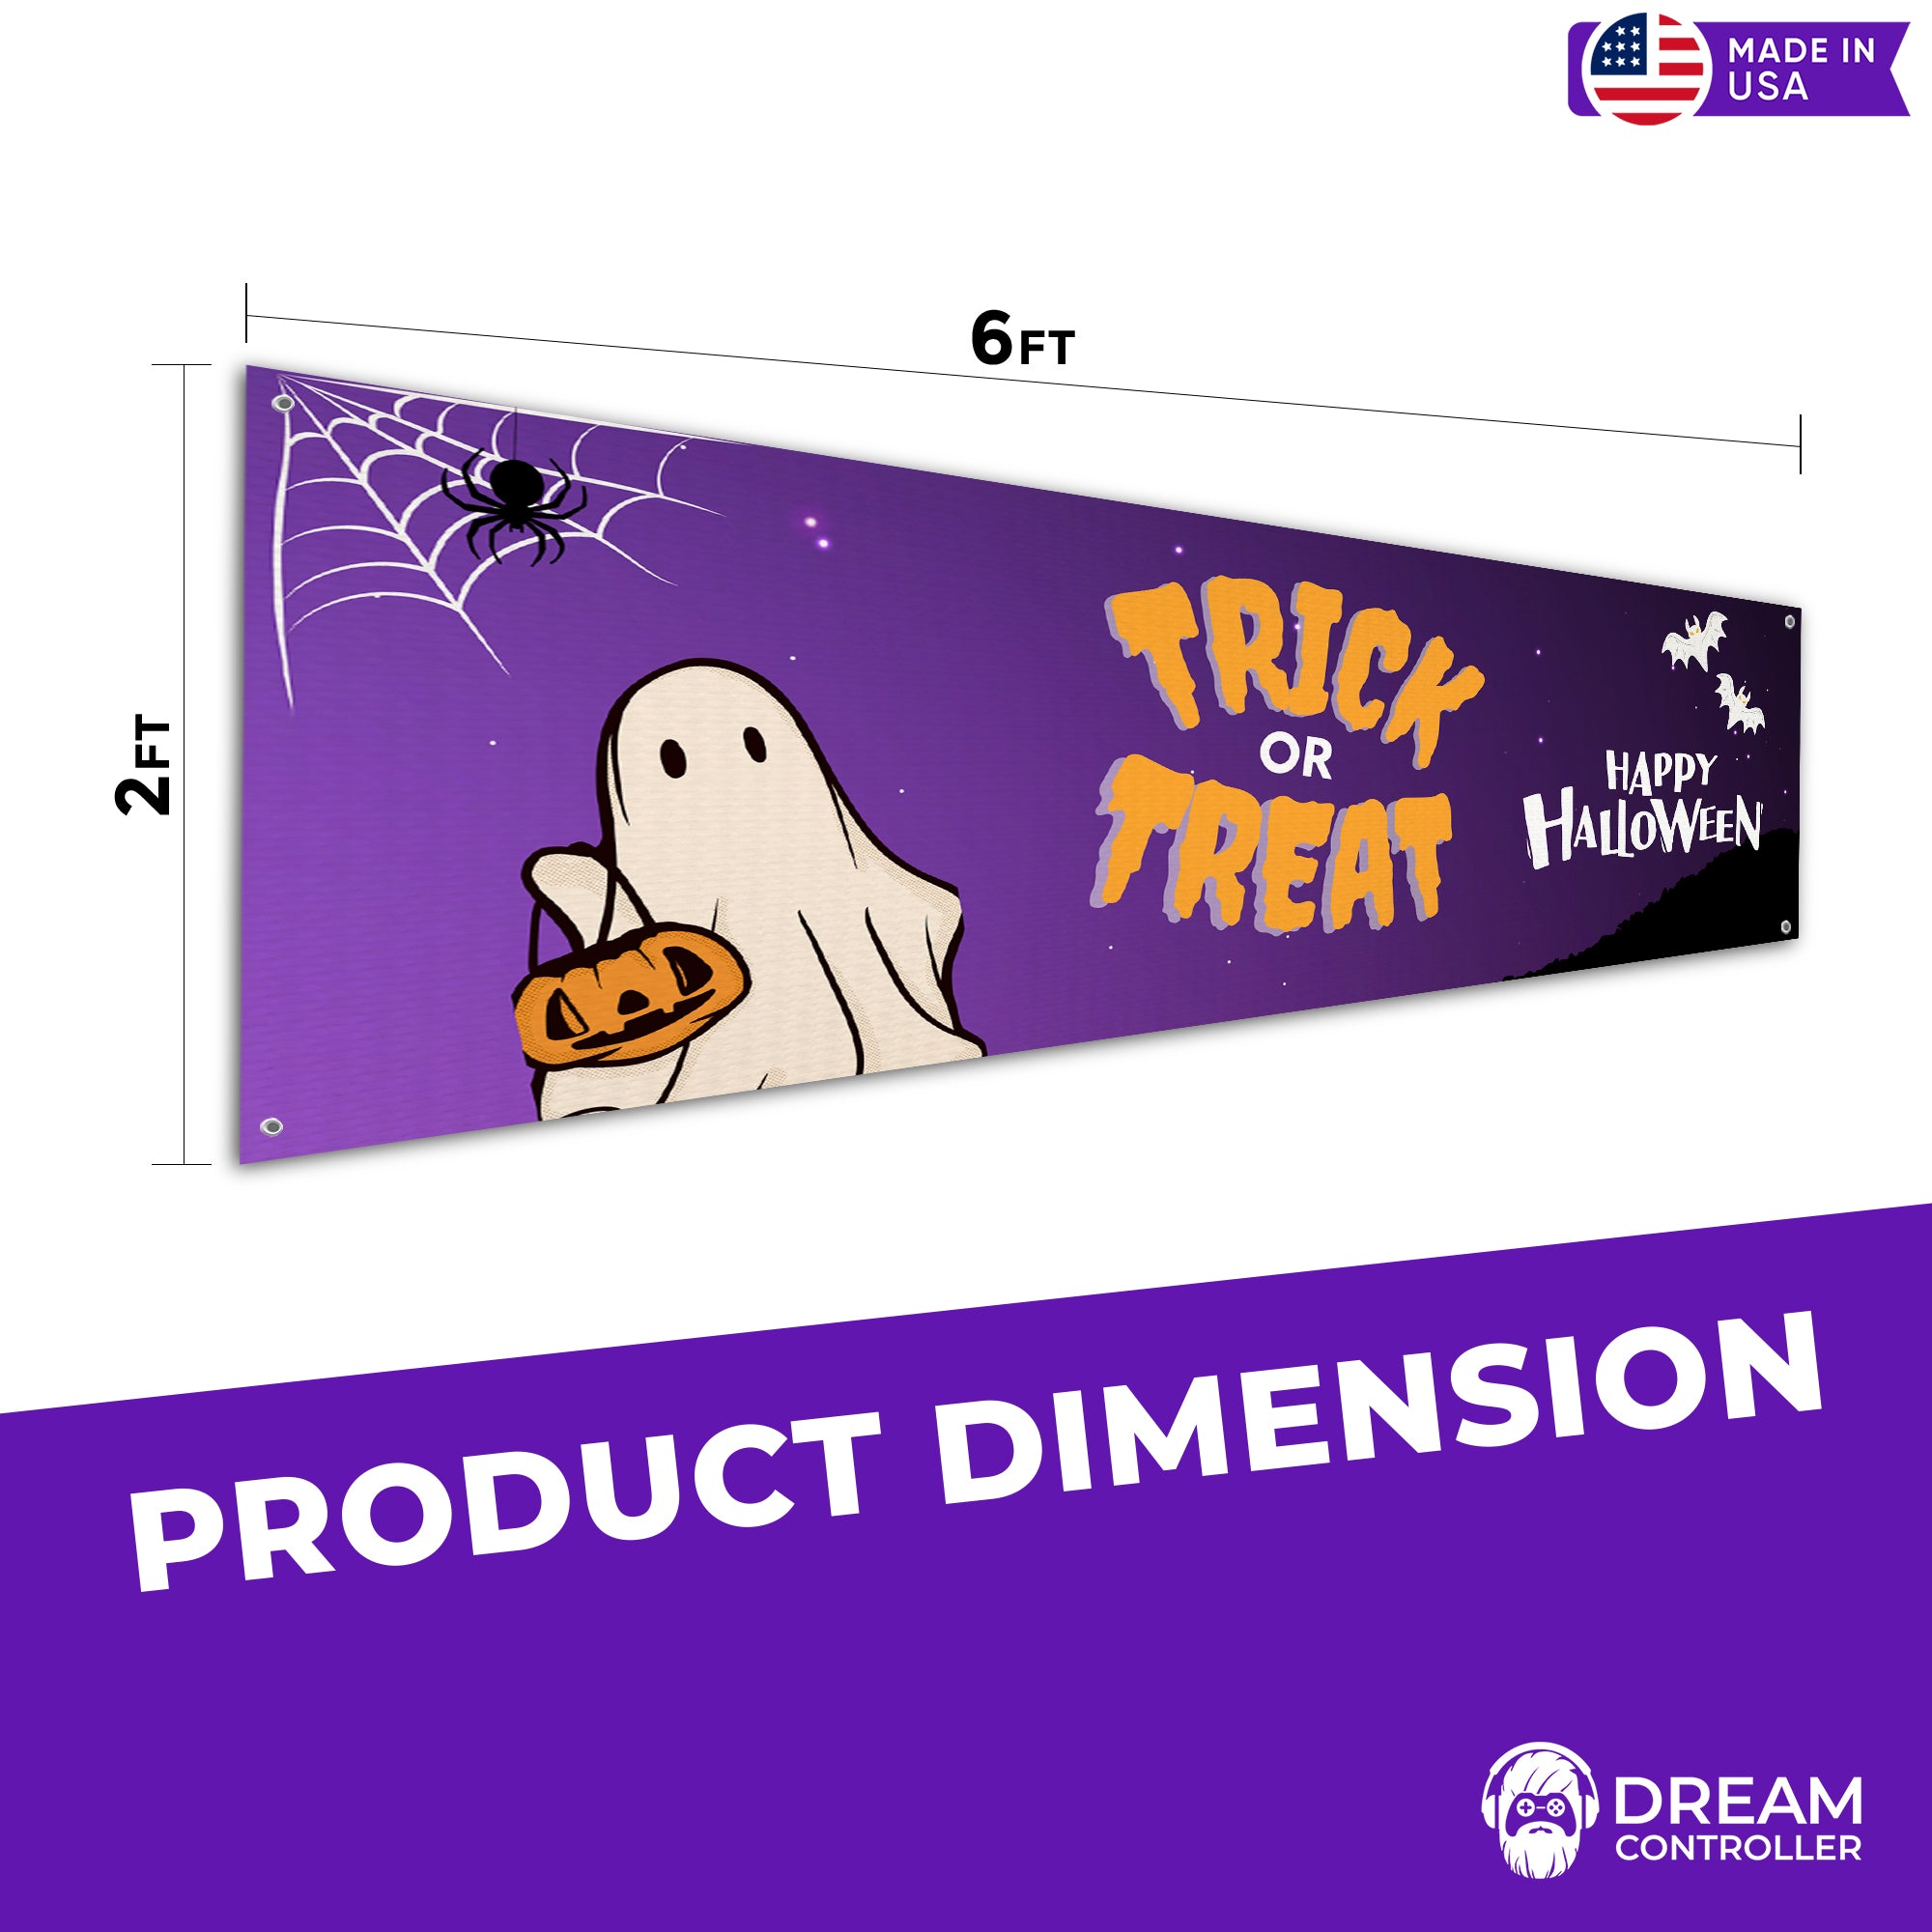 Happy Halloween Trick or Treat Banner: Durable, Easy to Hang, Fade-resistant